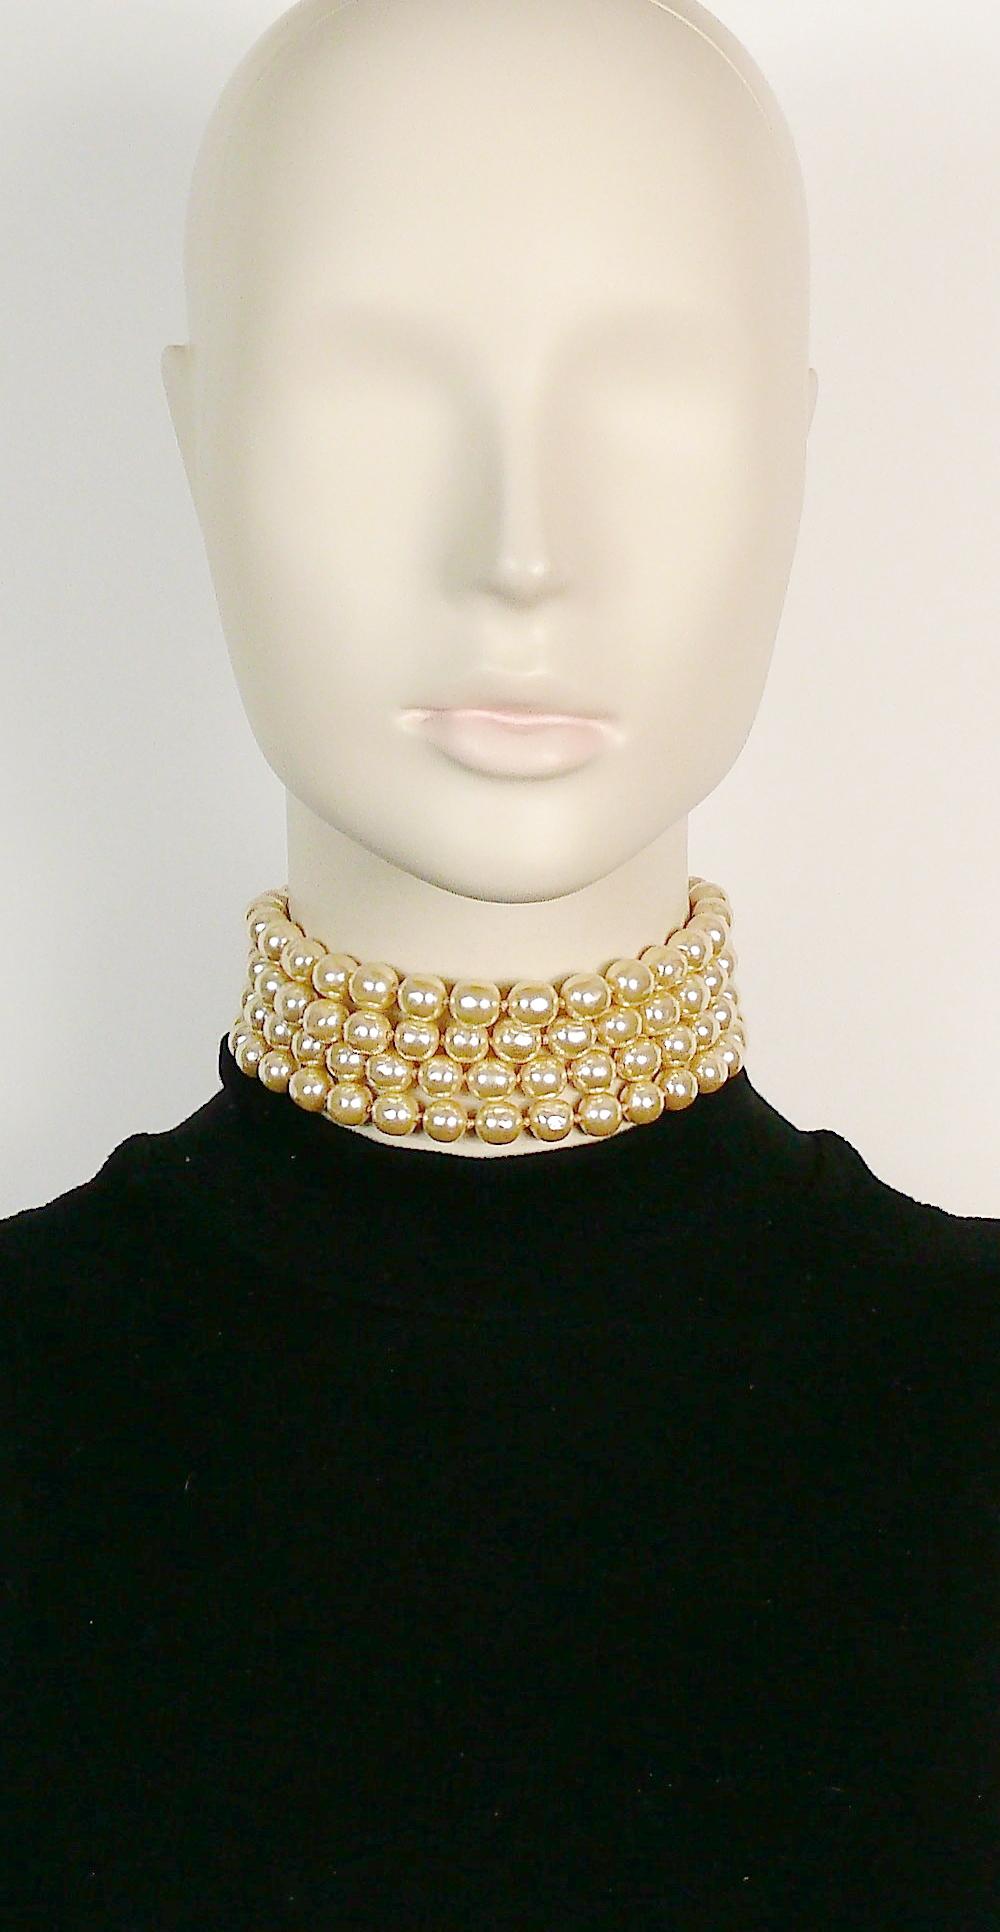 KARL LAGERFELD vintage four tiered off-white glass pearl strands choker necklace.

Gold toned hardware.

Adjustable double hook closure.

Embossed KL.

Indicative measurements : adjustable length from approx. 32 cm (12.60 inches) to approx. 38 cm